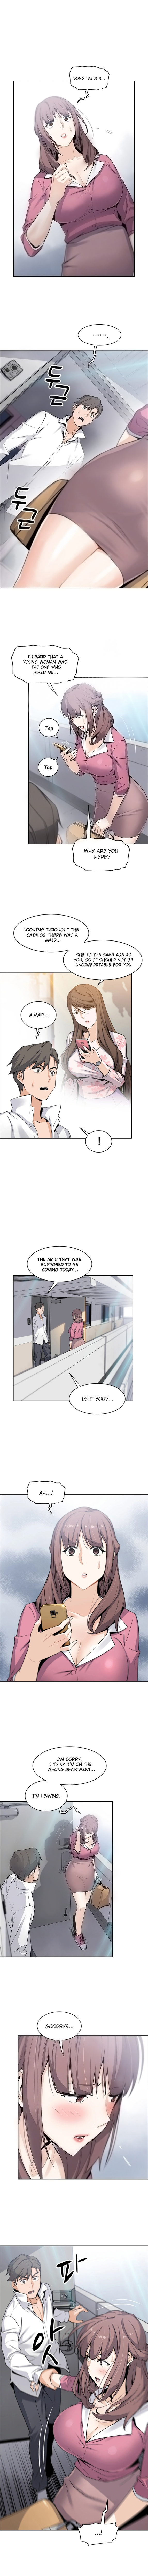 Housekeeper Manhwa - Chapter 8 Page 2